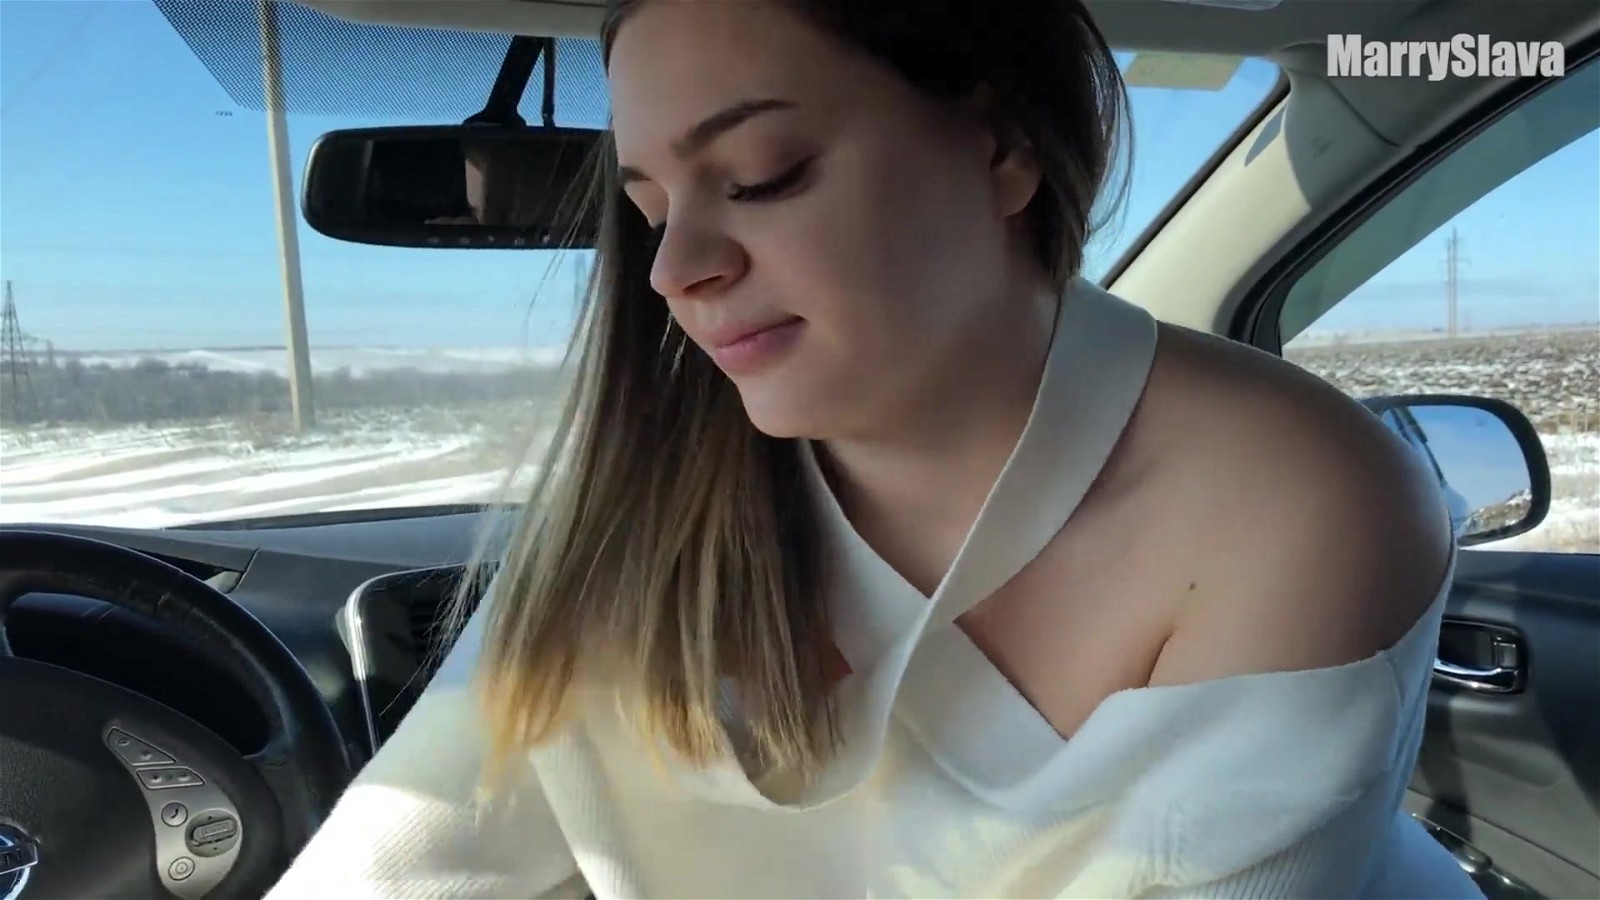 Russian girl sucking dick and getting fucked in the car » PornoReino image